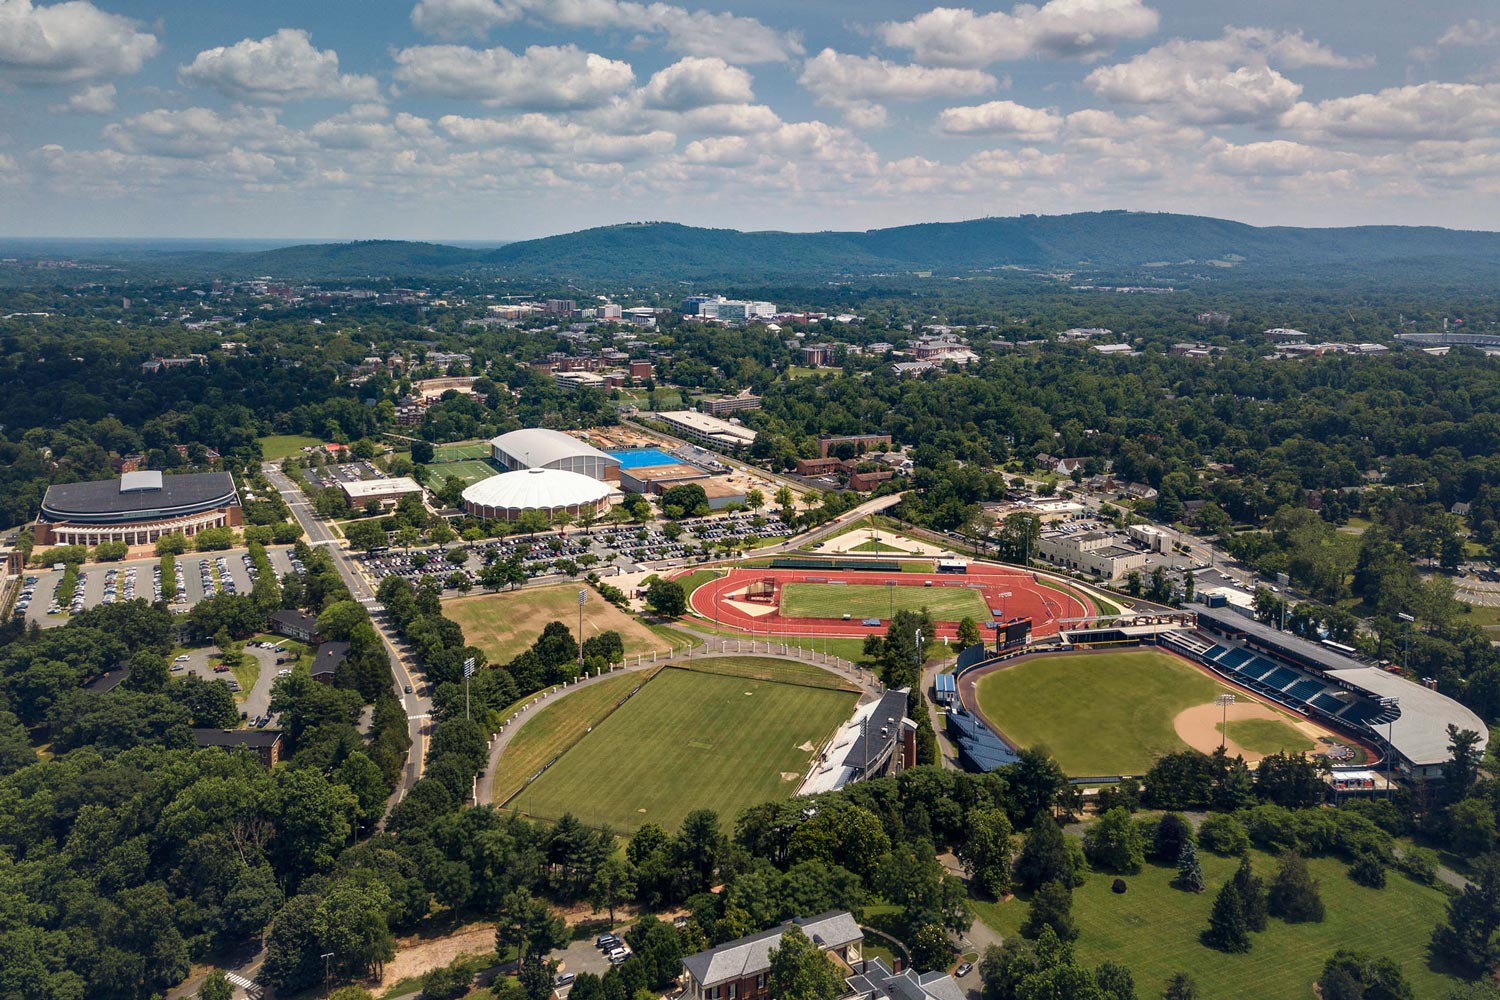 Aerial view of the Athletics complexes on grounds